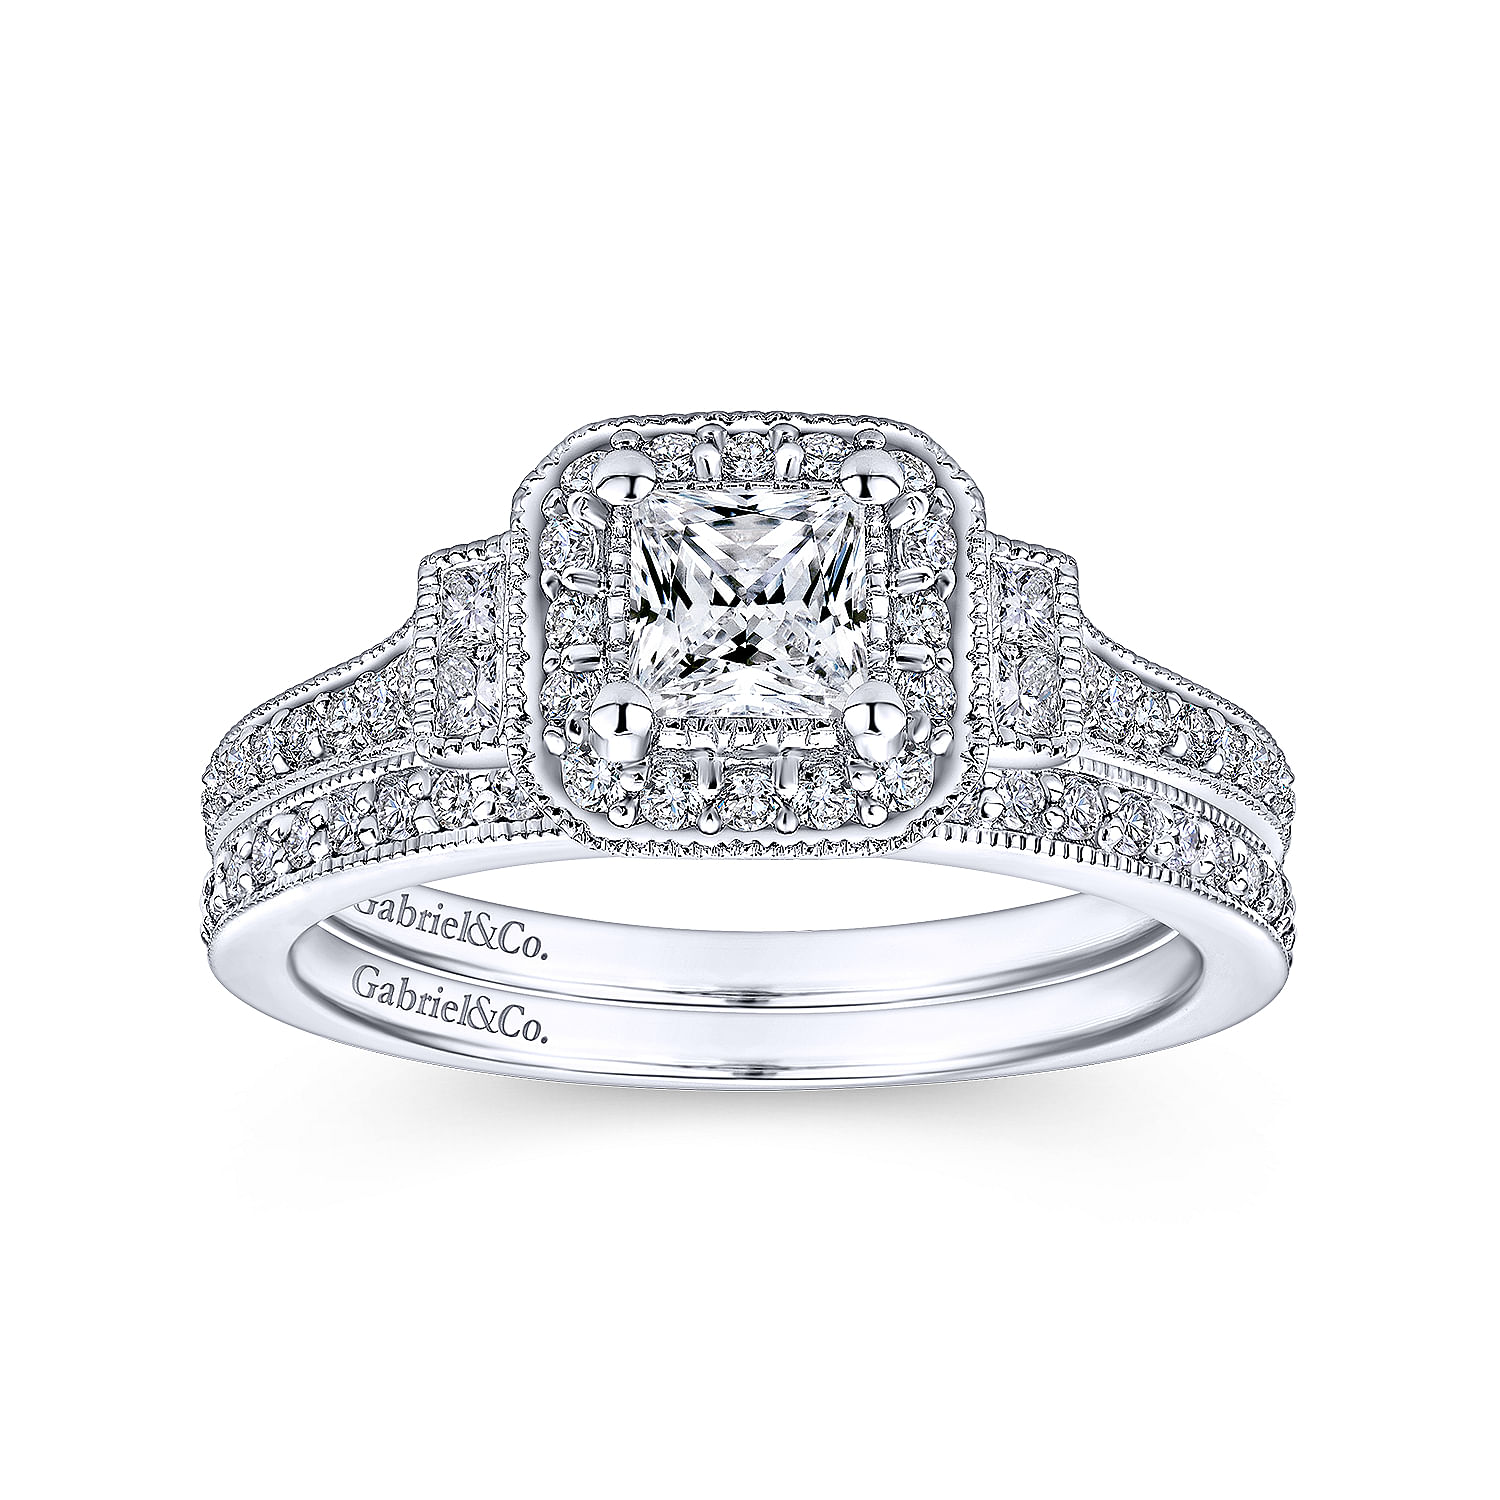 Vintage Inspired 14K White Gold Princess Halo Complete Diamond Channel Set Engagement Ring